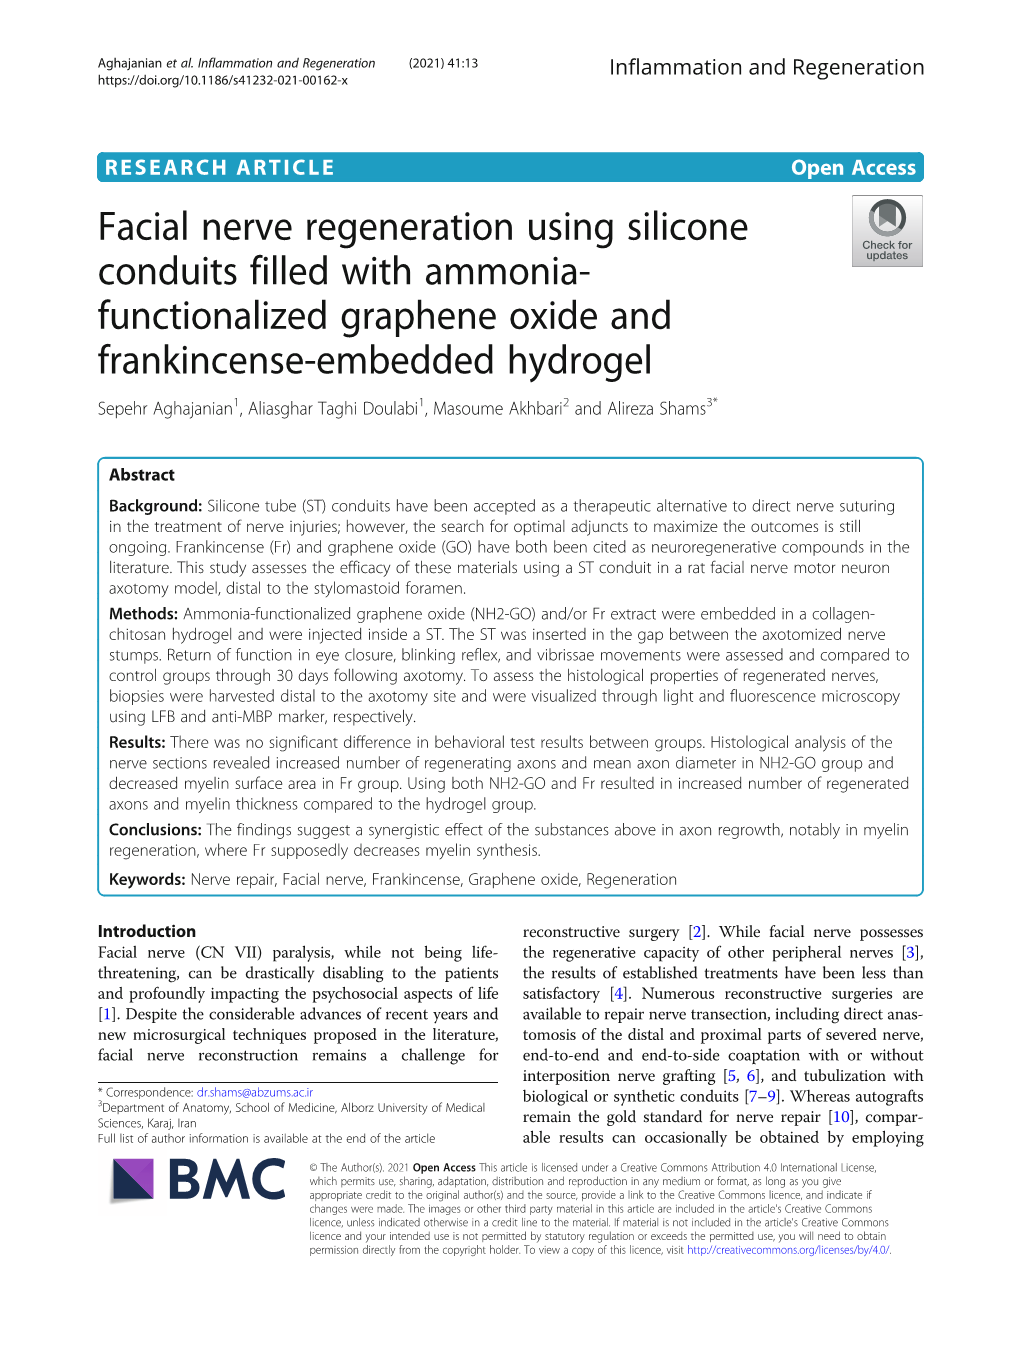 Facial Nerve Regeneration Using Silicone Conduits Filled With